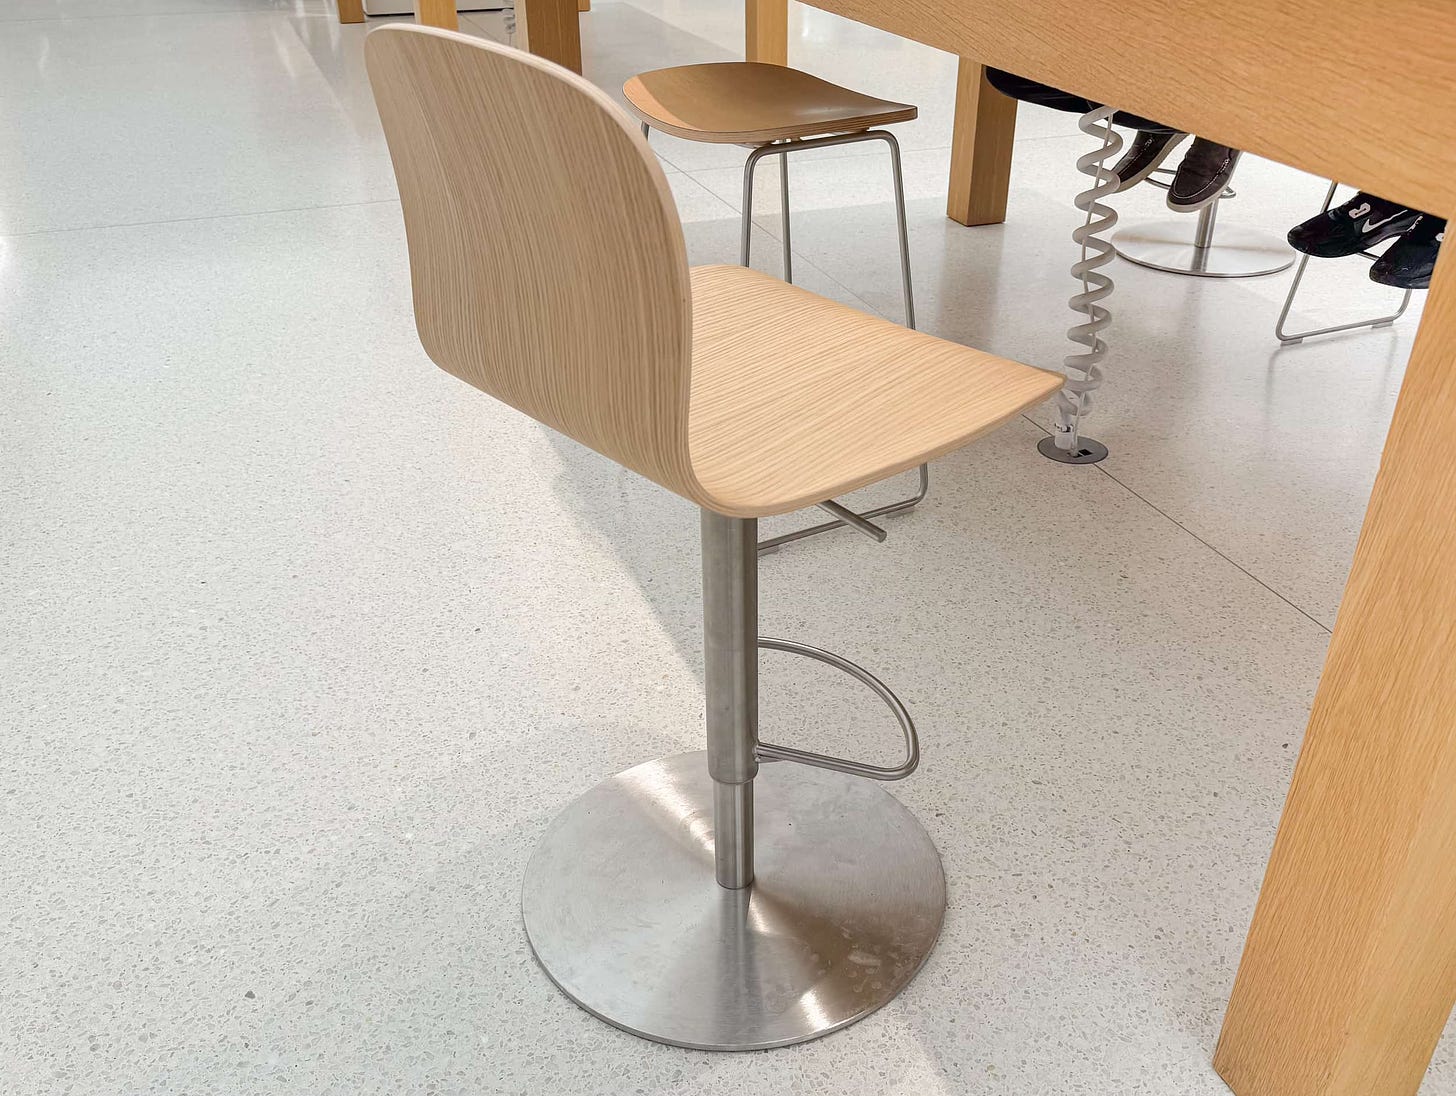 A new stool that accommodates Apple Vision Pro demos.